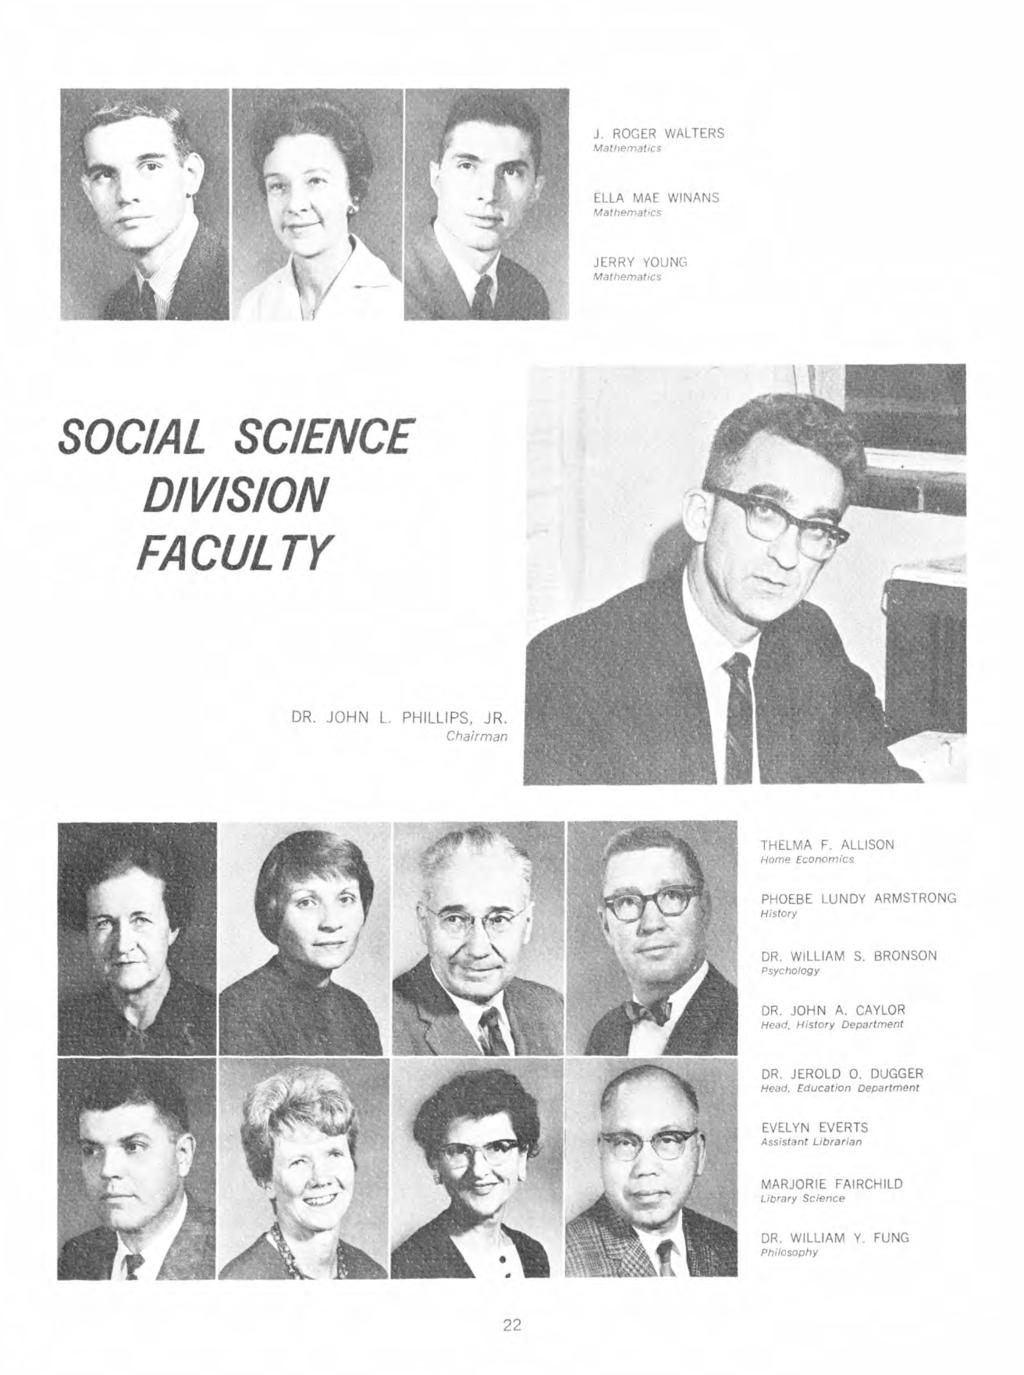 J. ROGER WALTERS ELLA MAE WINANS JERRY YOUNG SOCIAL SCIENCE DIVISION FACULTY DR. JOHN L. PHILLIPS, JR. THELMA F. ALLISON Home Economics PHOEBE LUNDY ARMSTRONG DR. WILLIAM S.